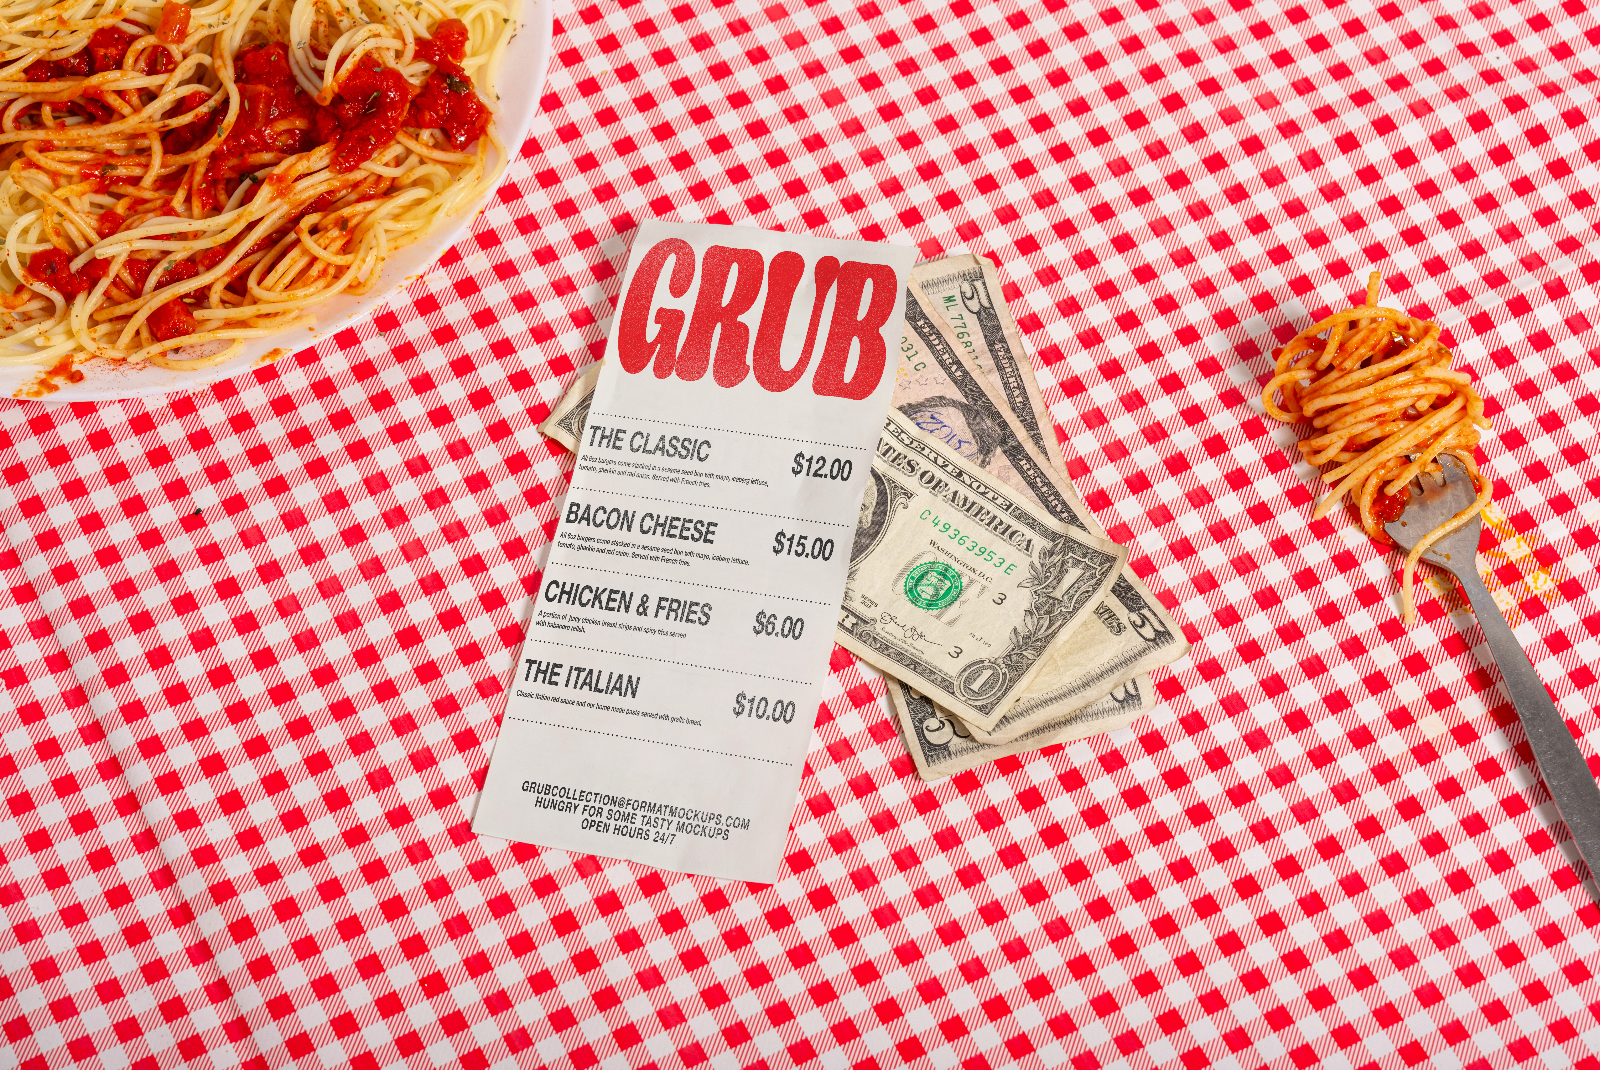 Classic diner meal with spaghetti and menu mockup, dollars on red checkered tablecloth, ideal for restaurant branding graphics.